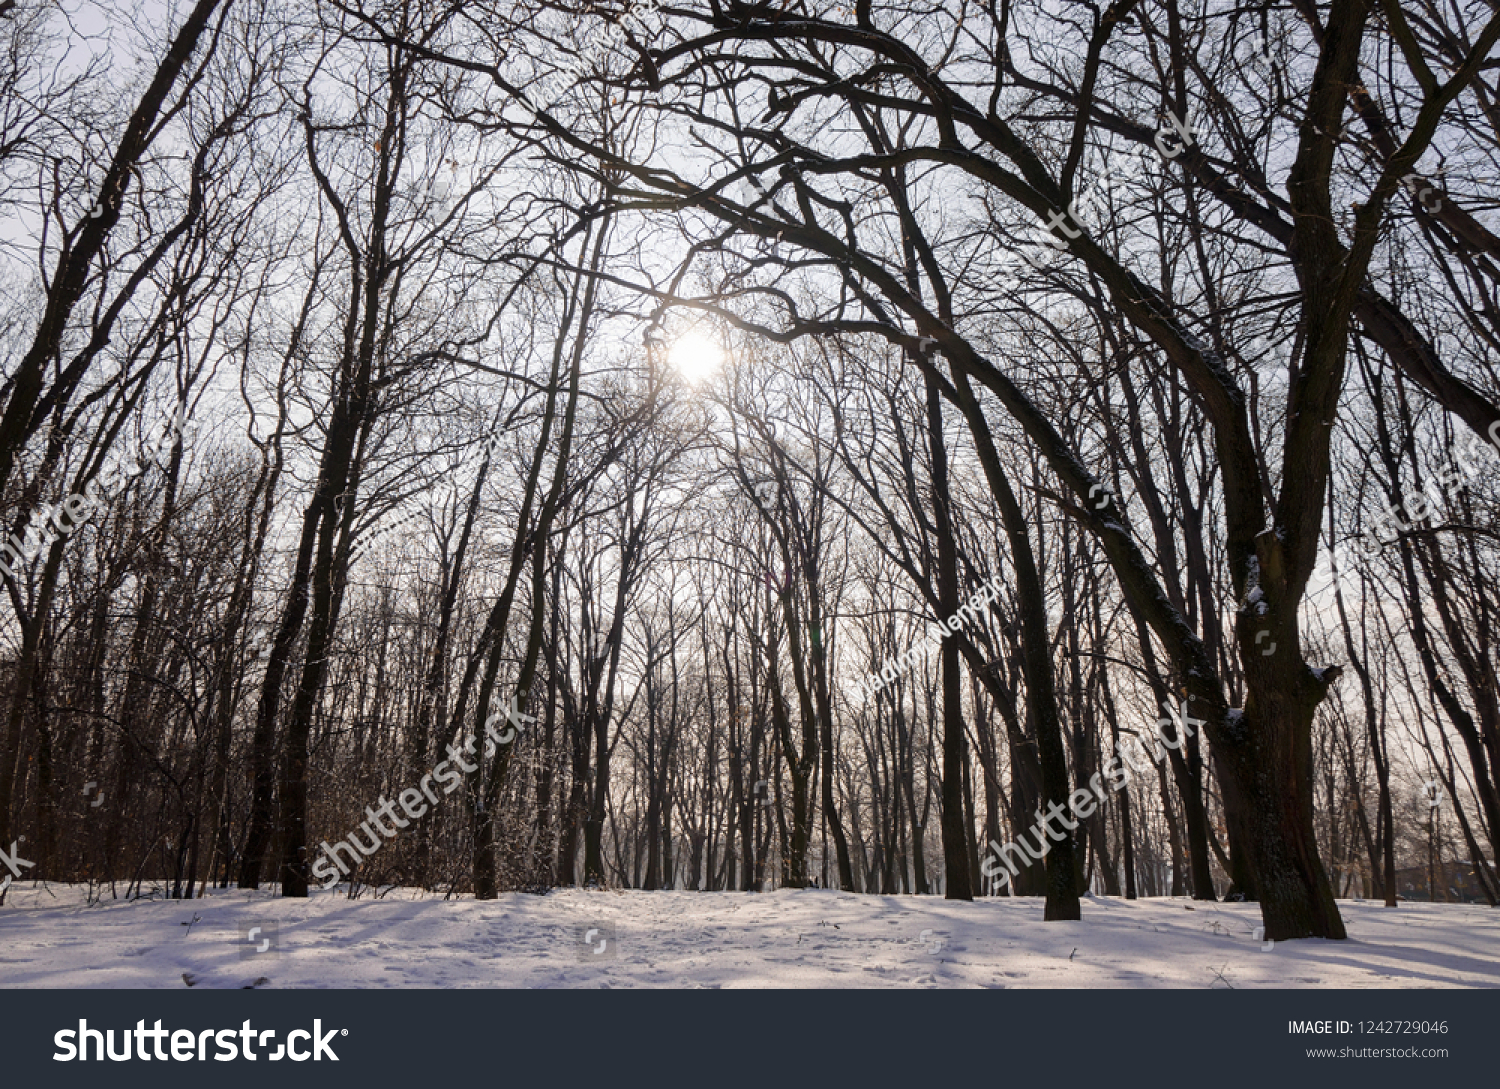 Forest under snow on a sunny day, note shallow depth of field #1242729046